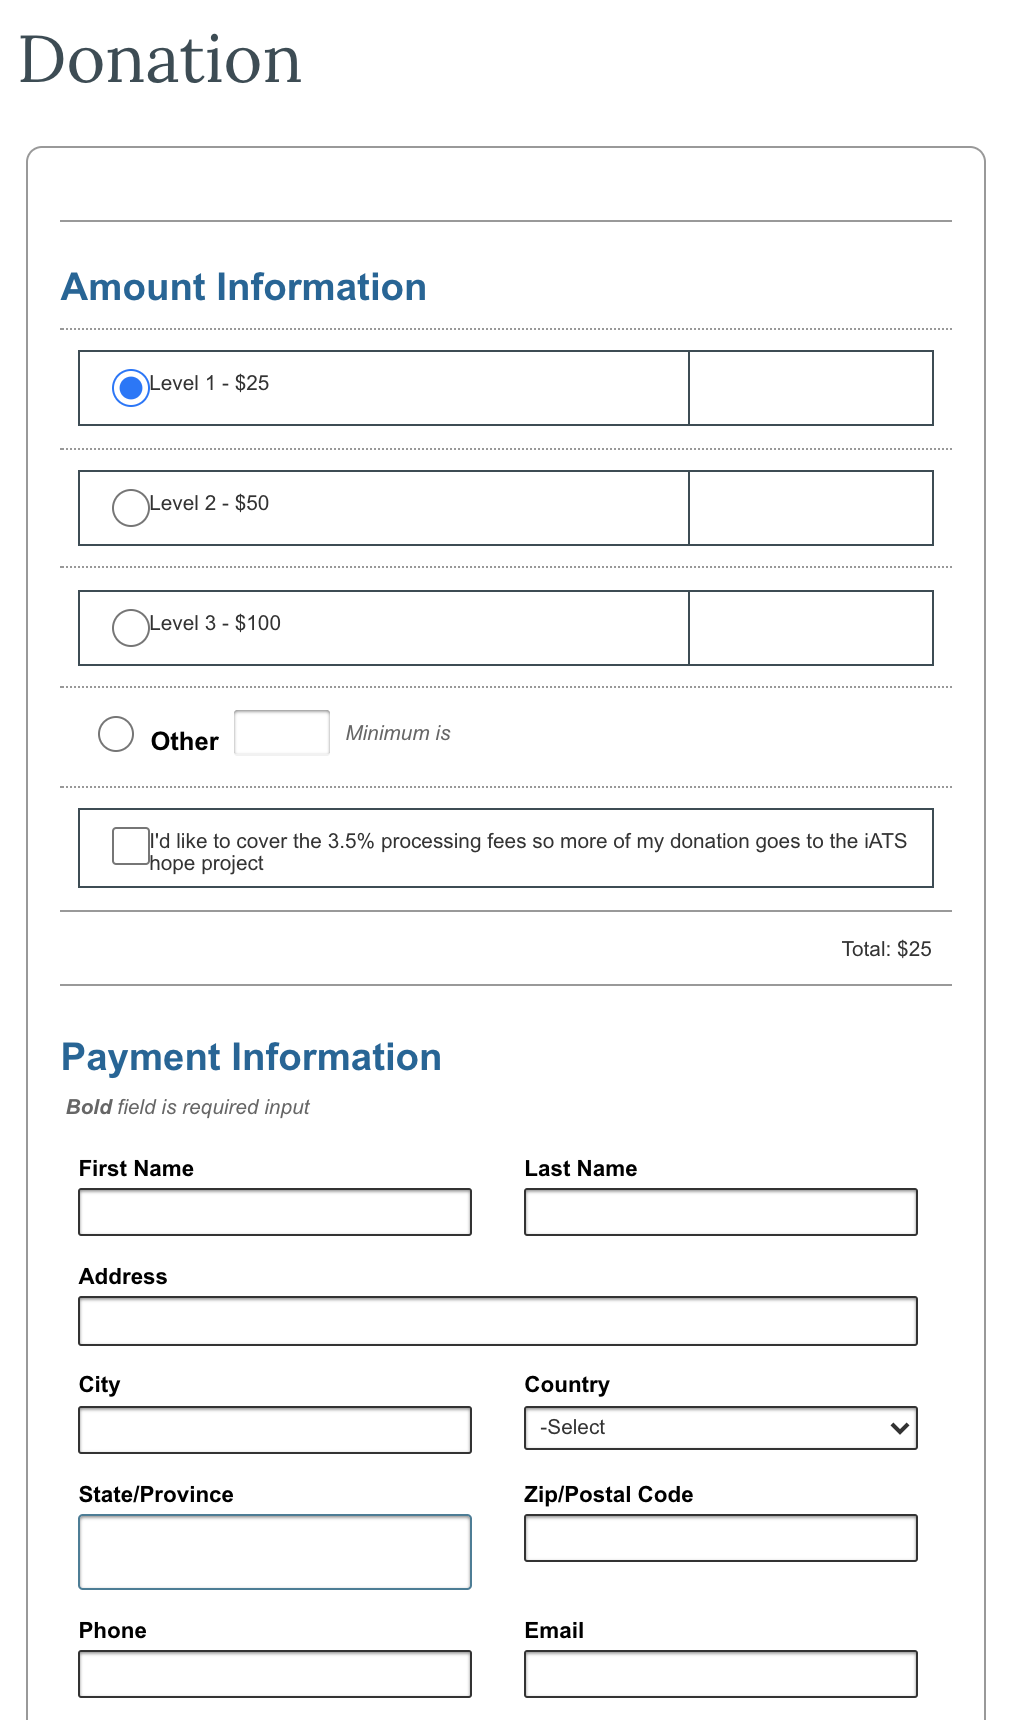 Sample of an iATS Online Forms donation form.